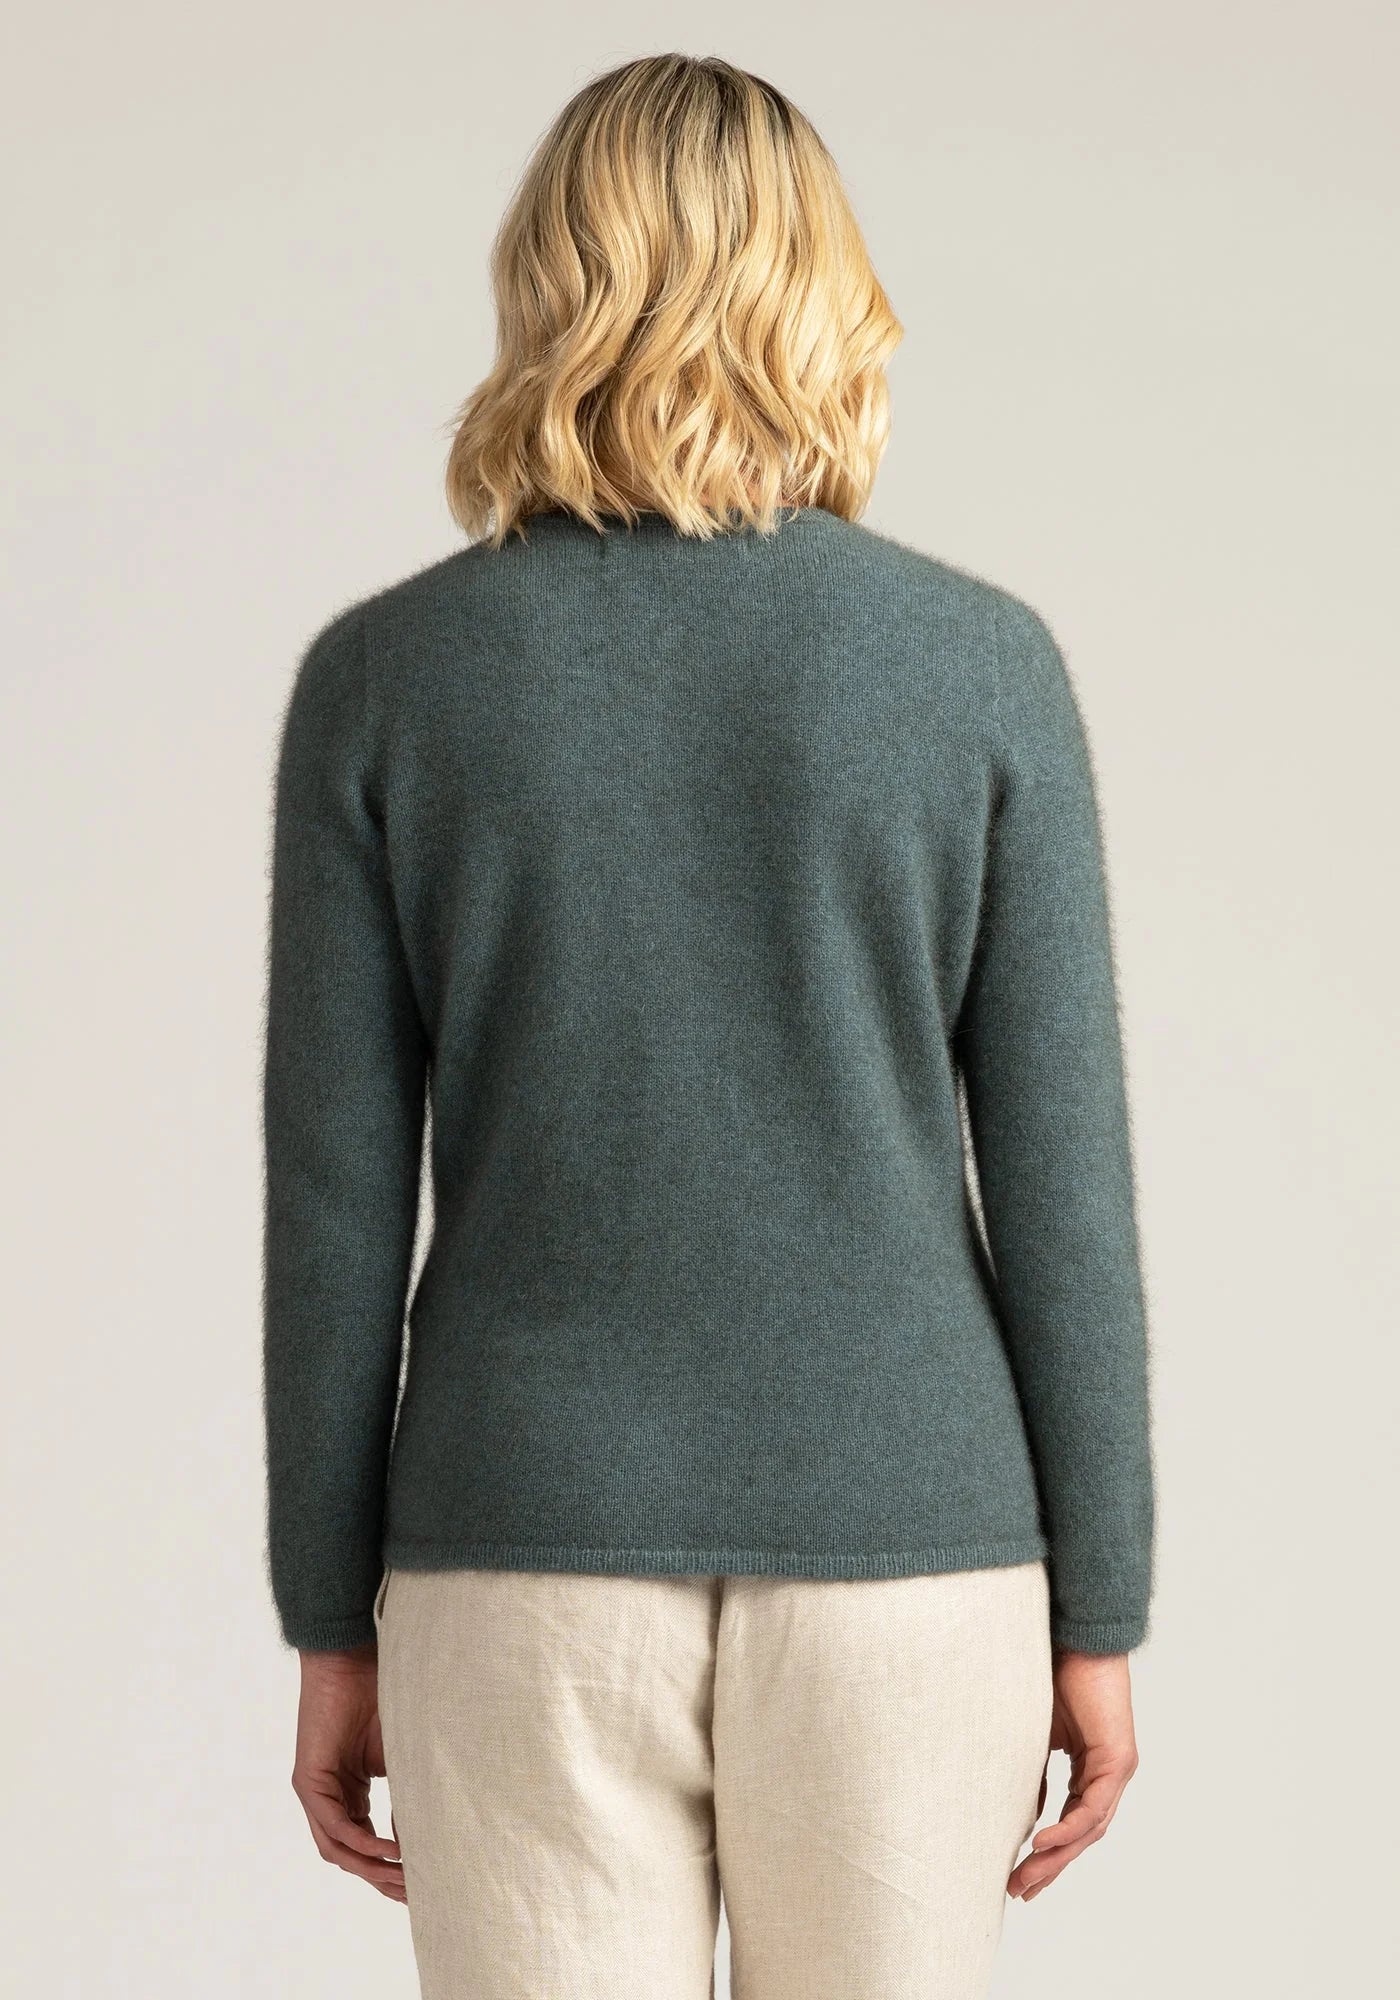 Experience luxury comfort: Pure Merino wool grey cardigan, timeless elegance for all occasions. Shop now!